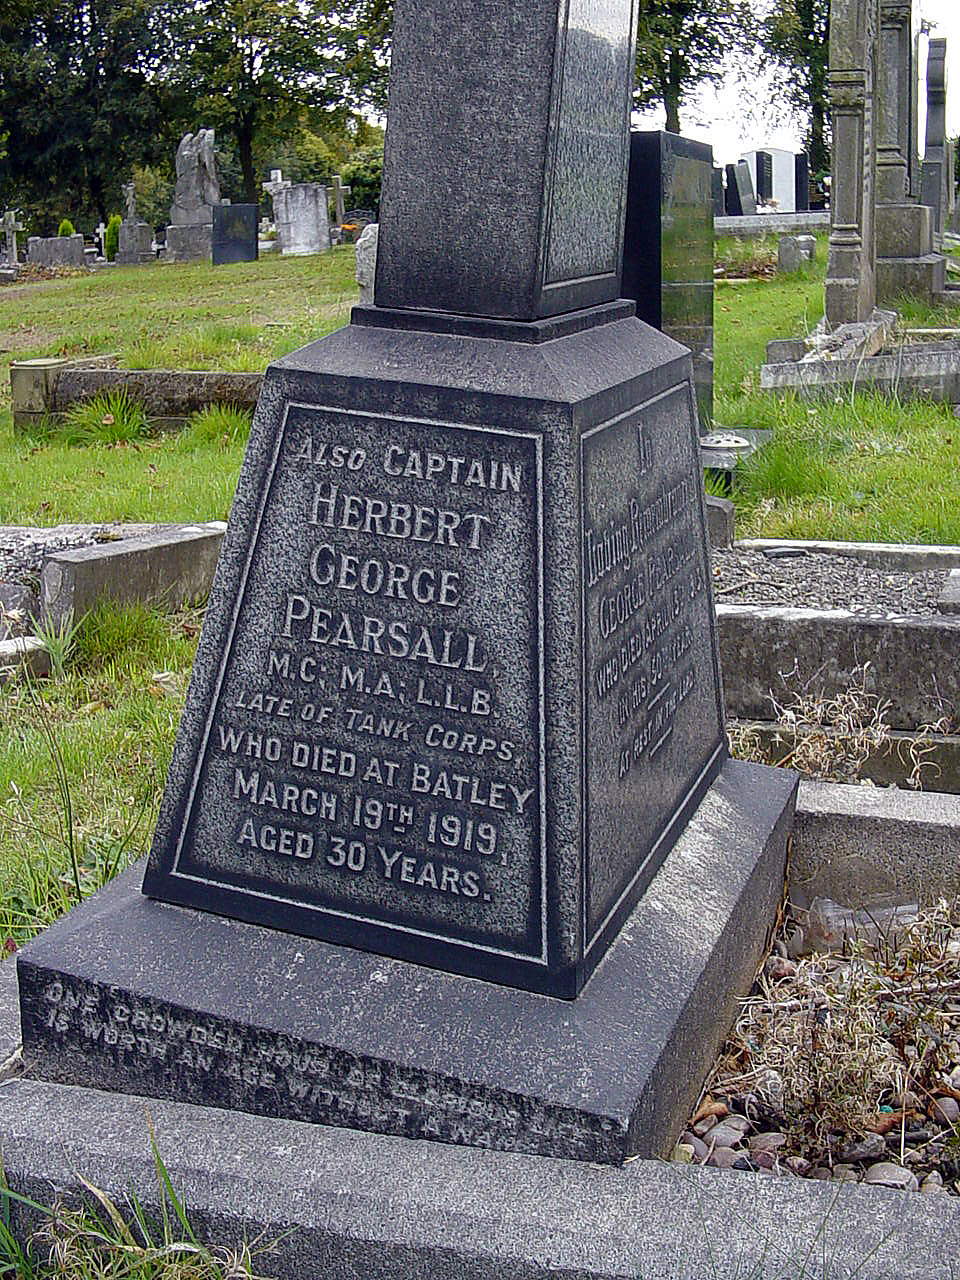 Herbert Pearsall’s Grave in Smethwick Cemetery. Image supplied by Stuart Archer.